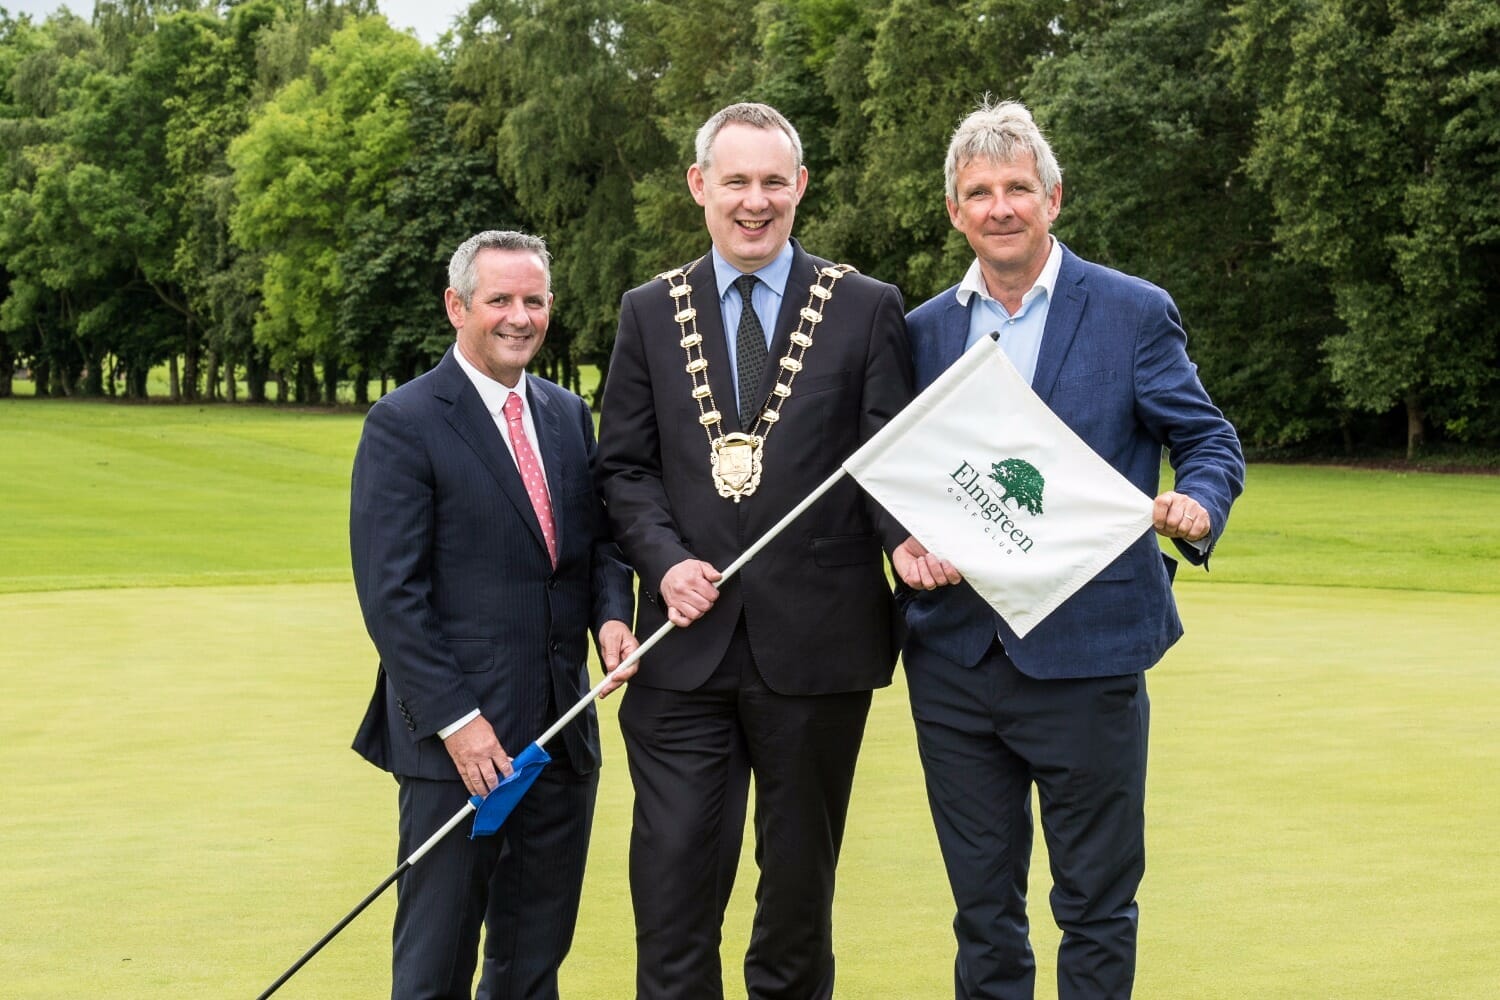 Elmgreen Golf Club re-launch after a €1million investment